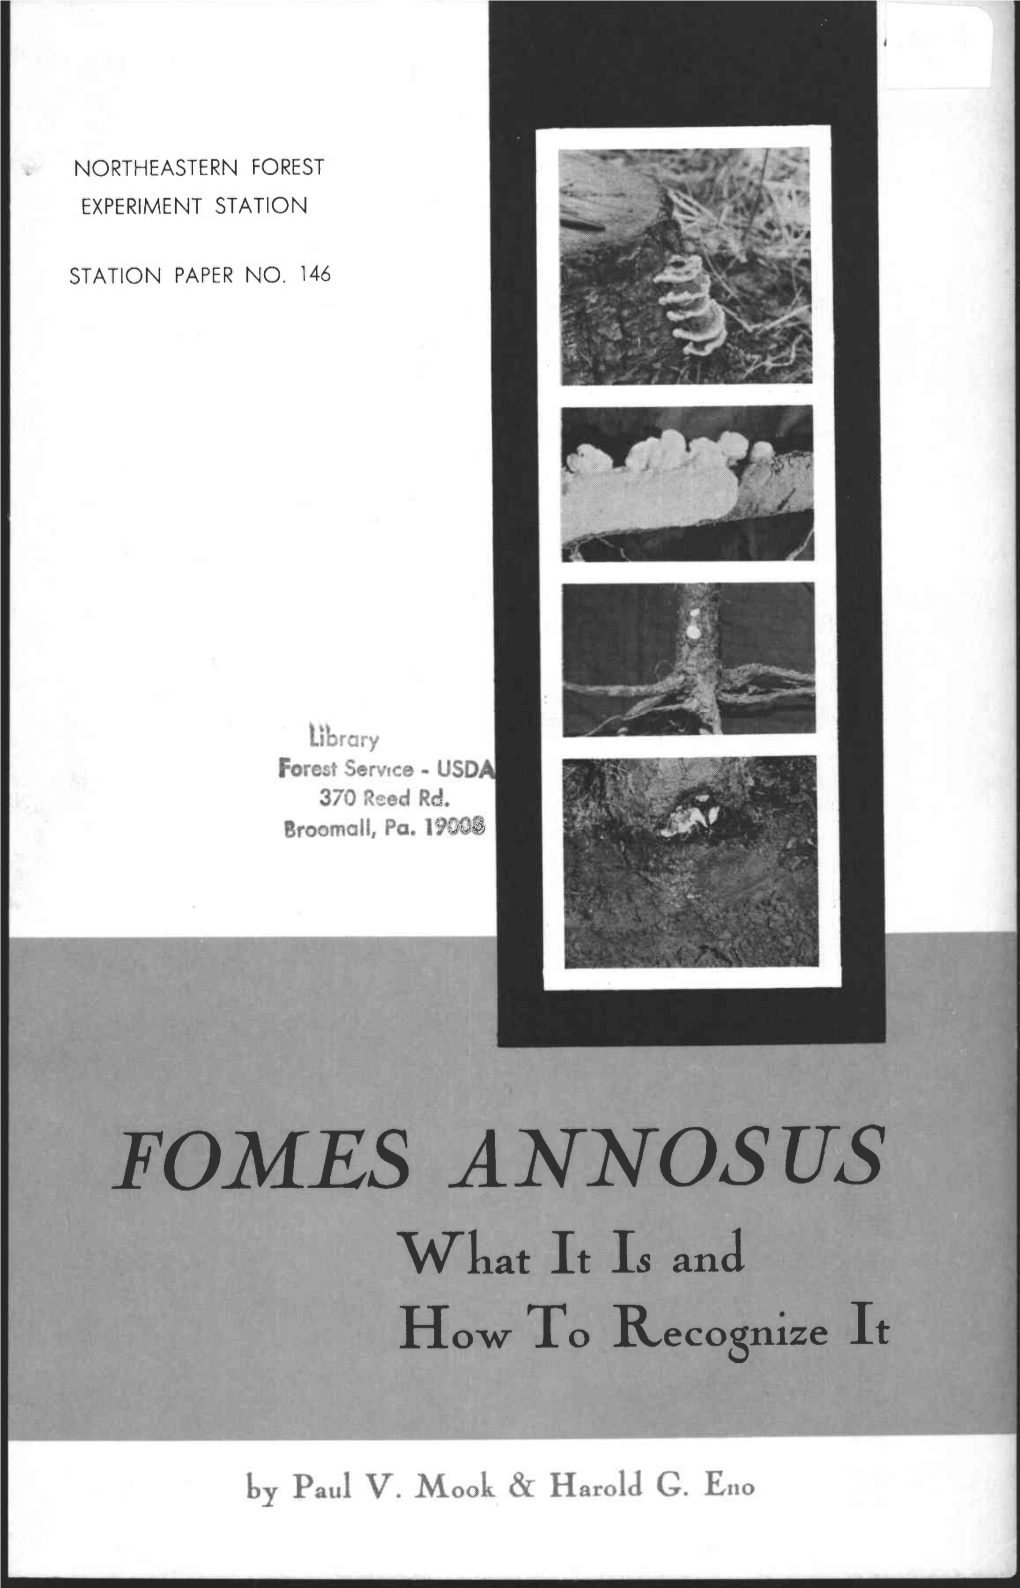 FOMES ANNOSUS What It Is and How to Recognize Lt